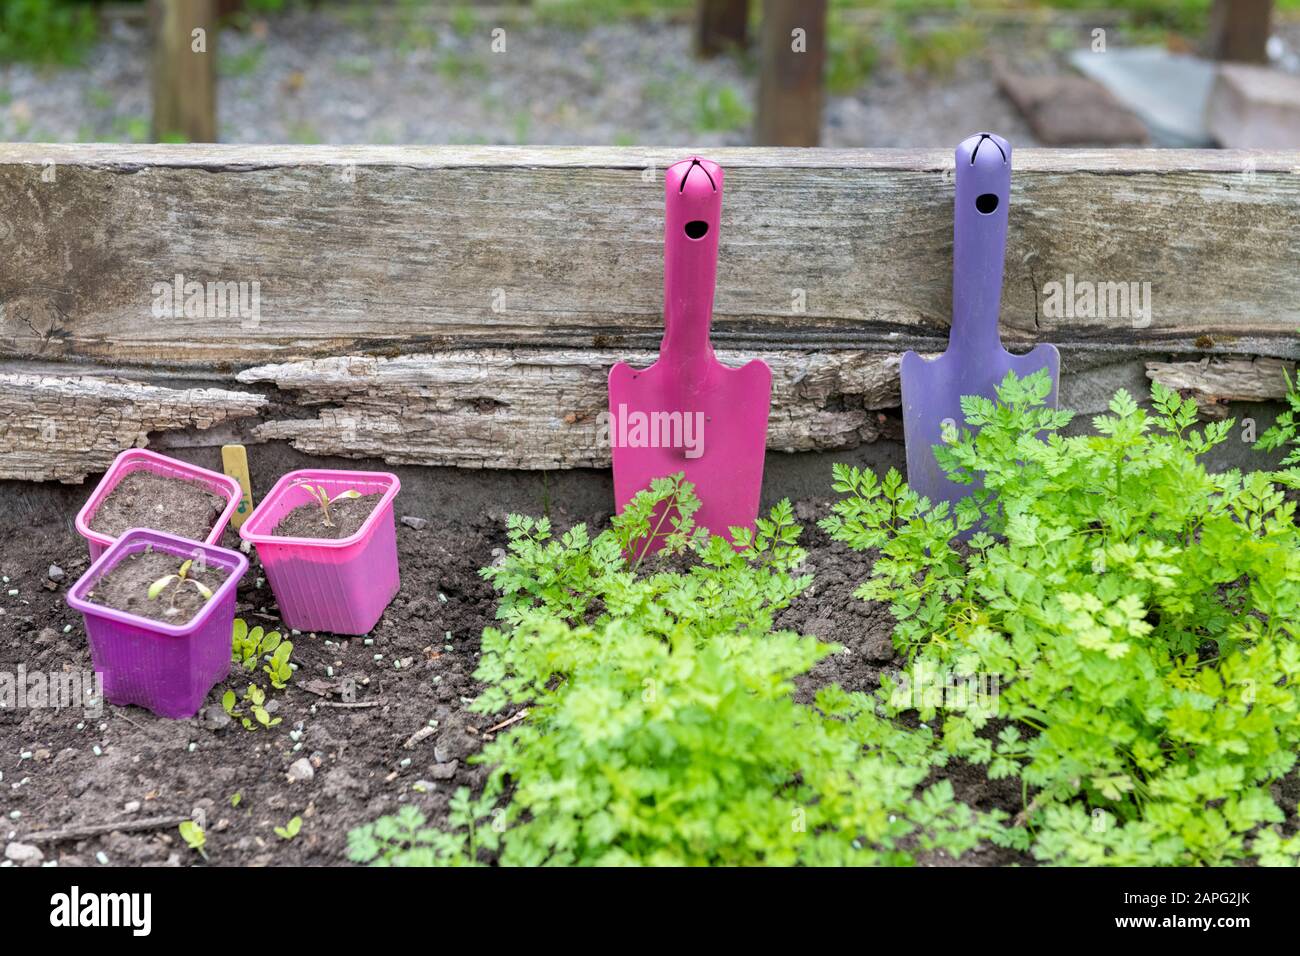 Flat parsley and flower buckets in a wooden tray in spring, Pas de Calais, France Stock Photo